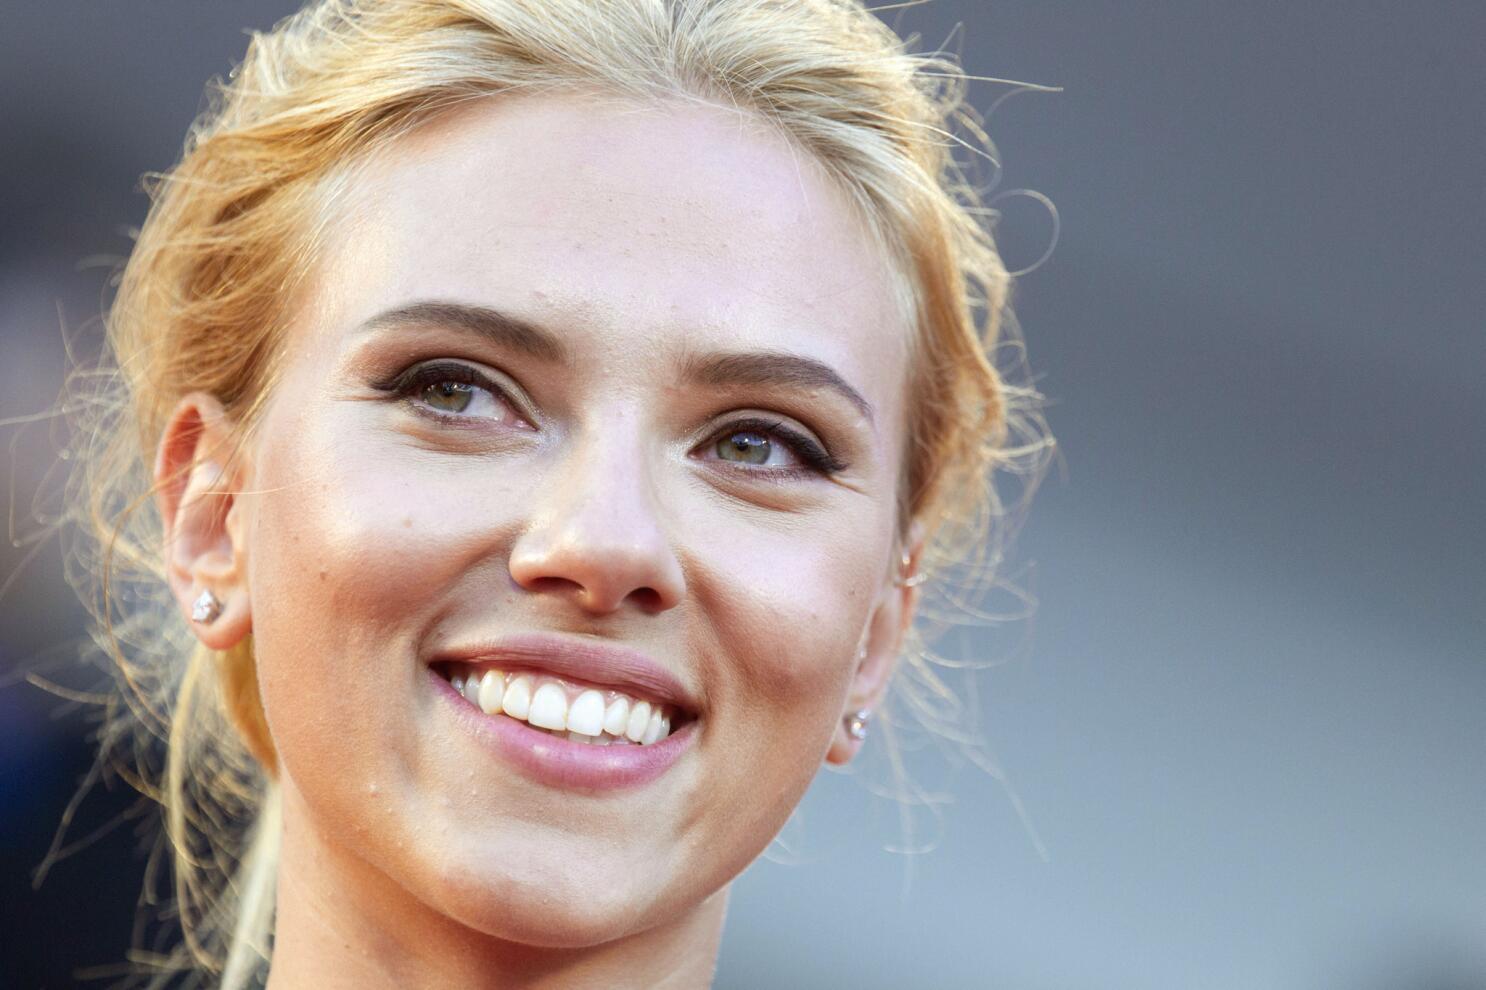 The Science Behind Why Scarlett Johansson's & Kate Middleton's